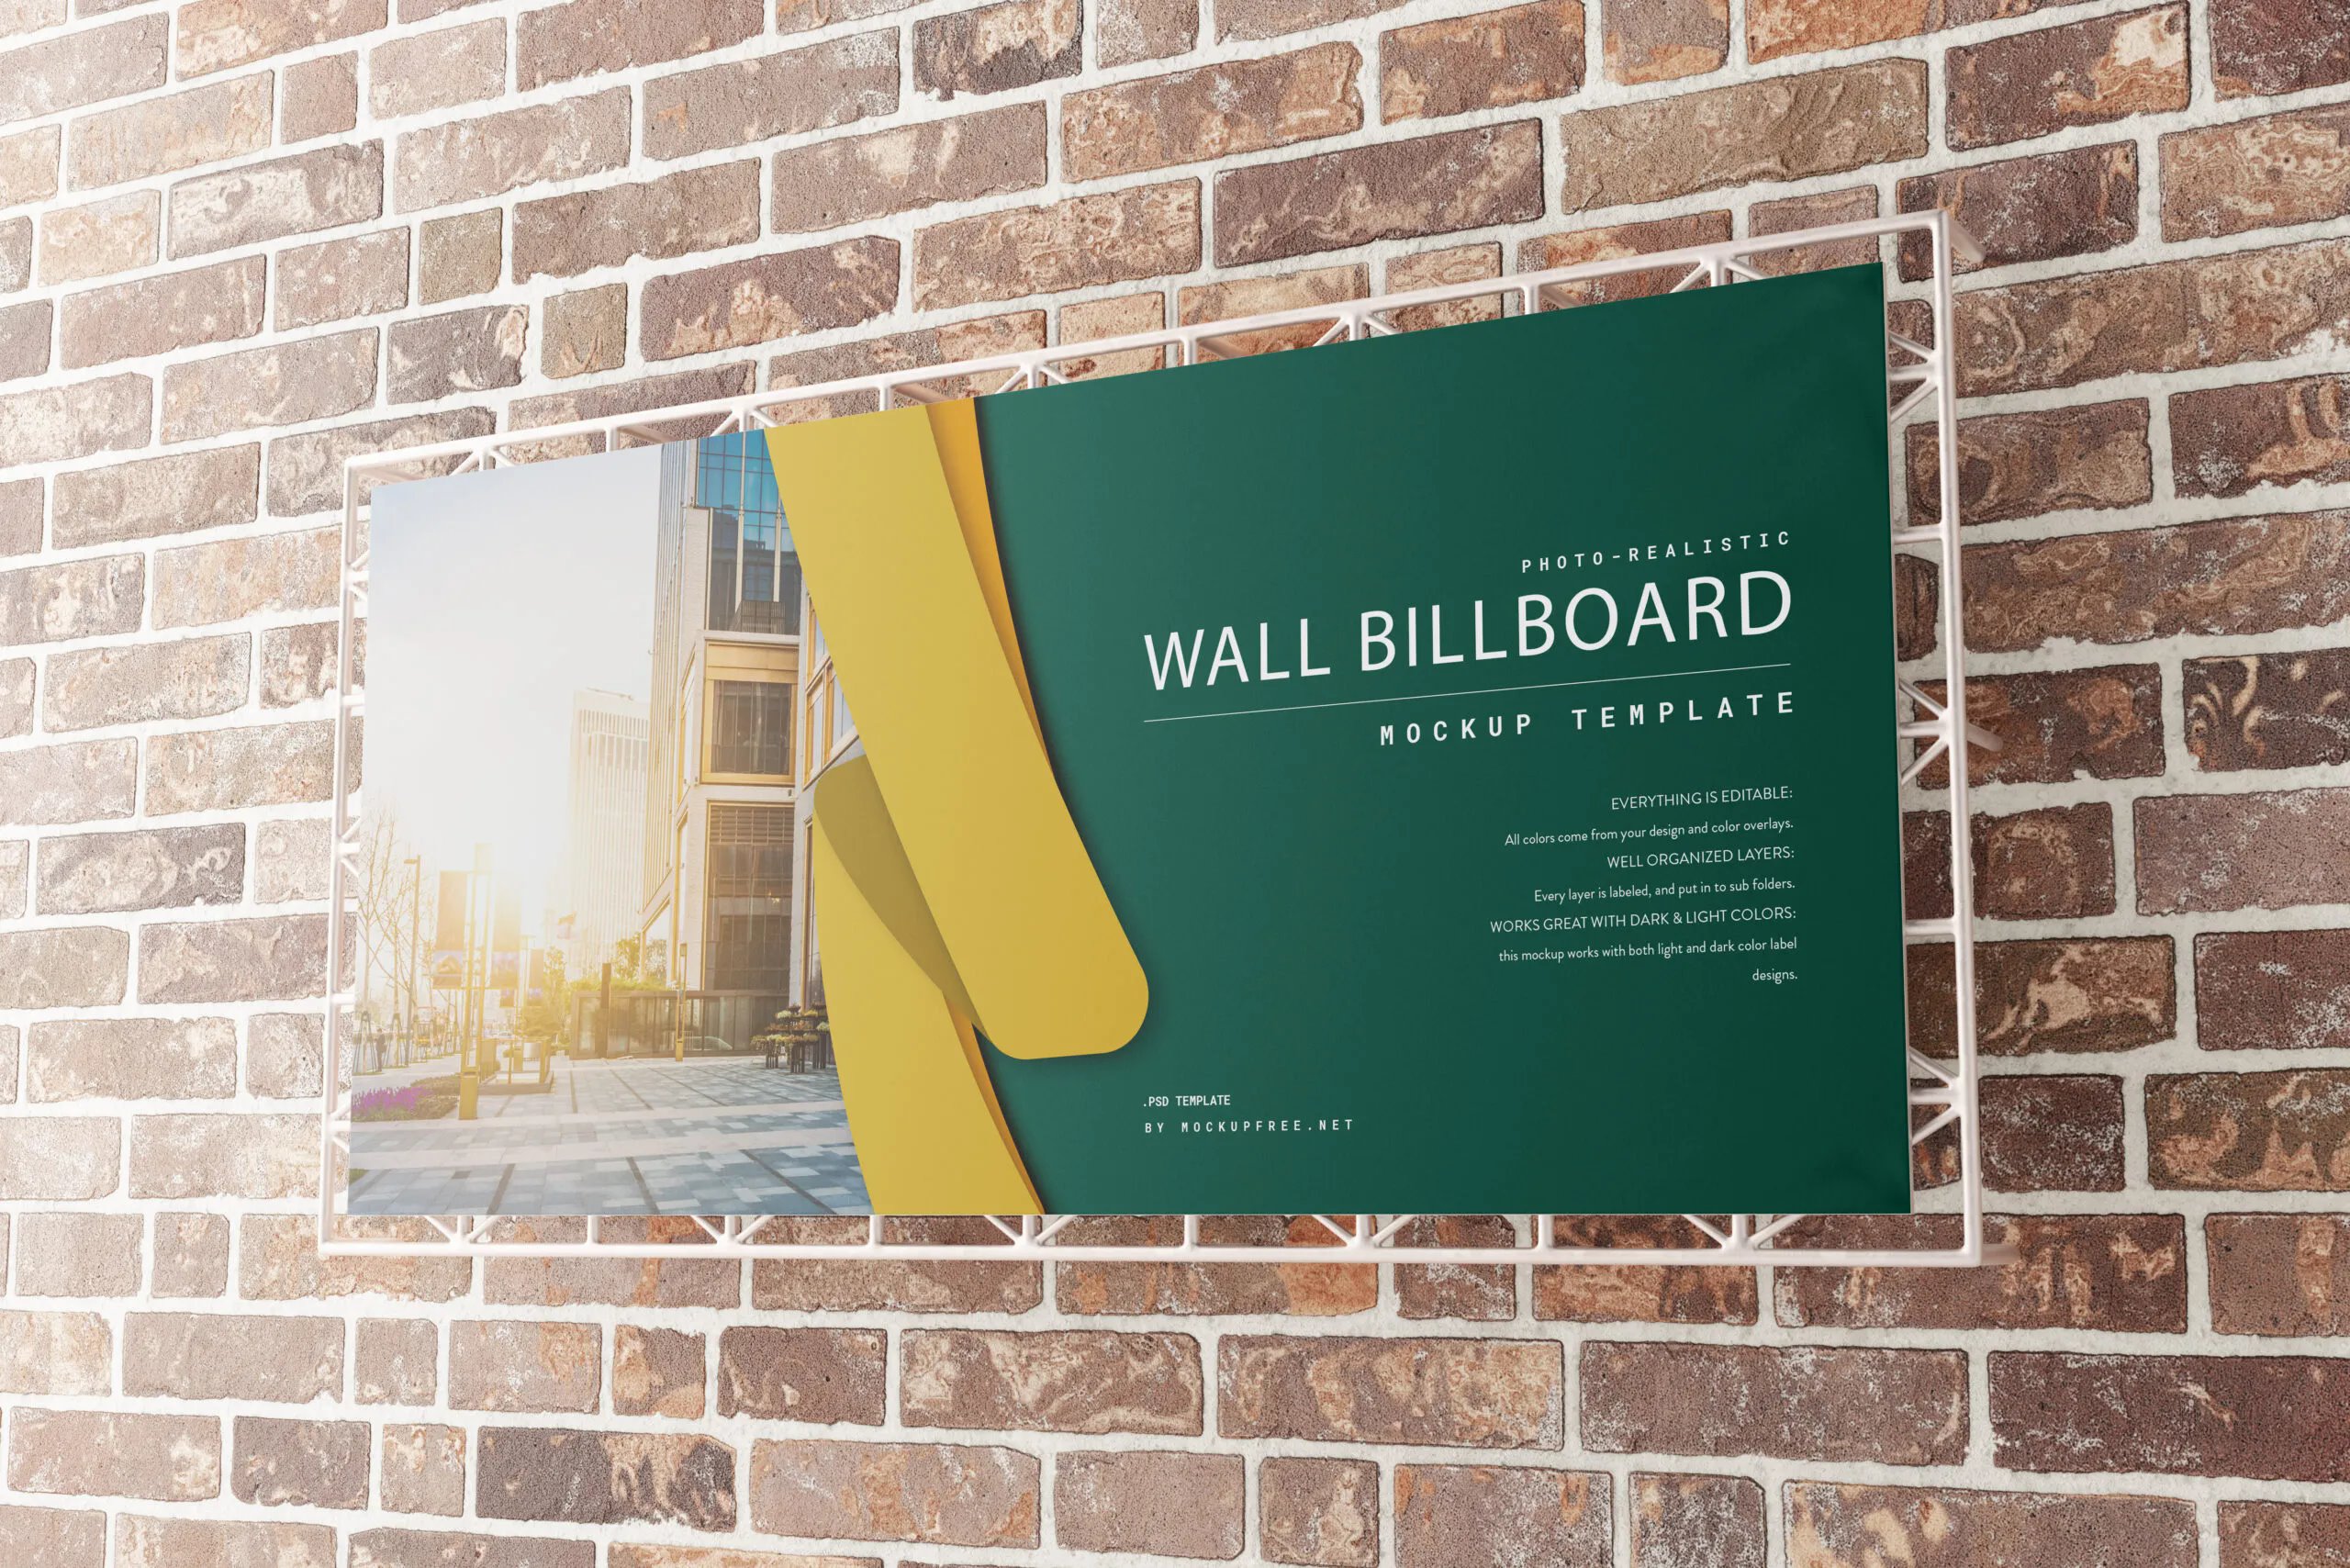 5 Wall Billboard Mockups in Front and Perspective Sights FREE PSD